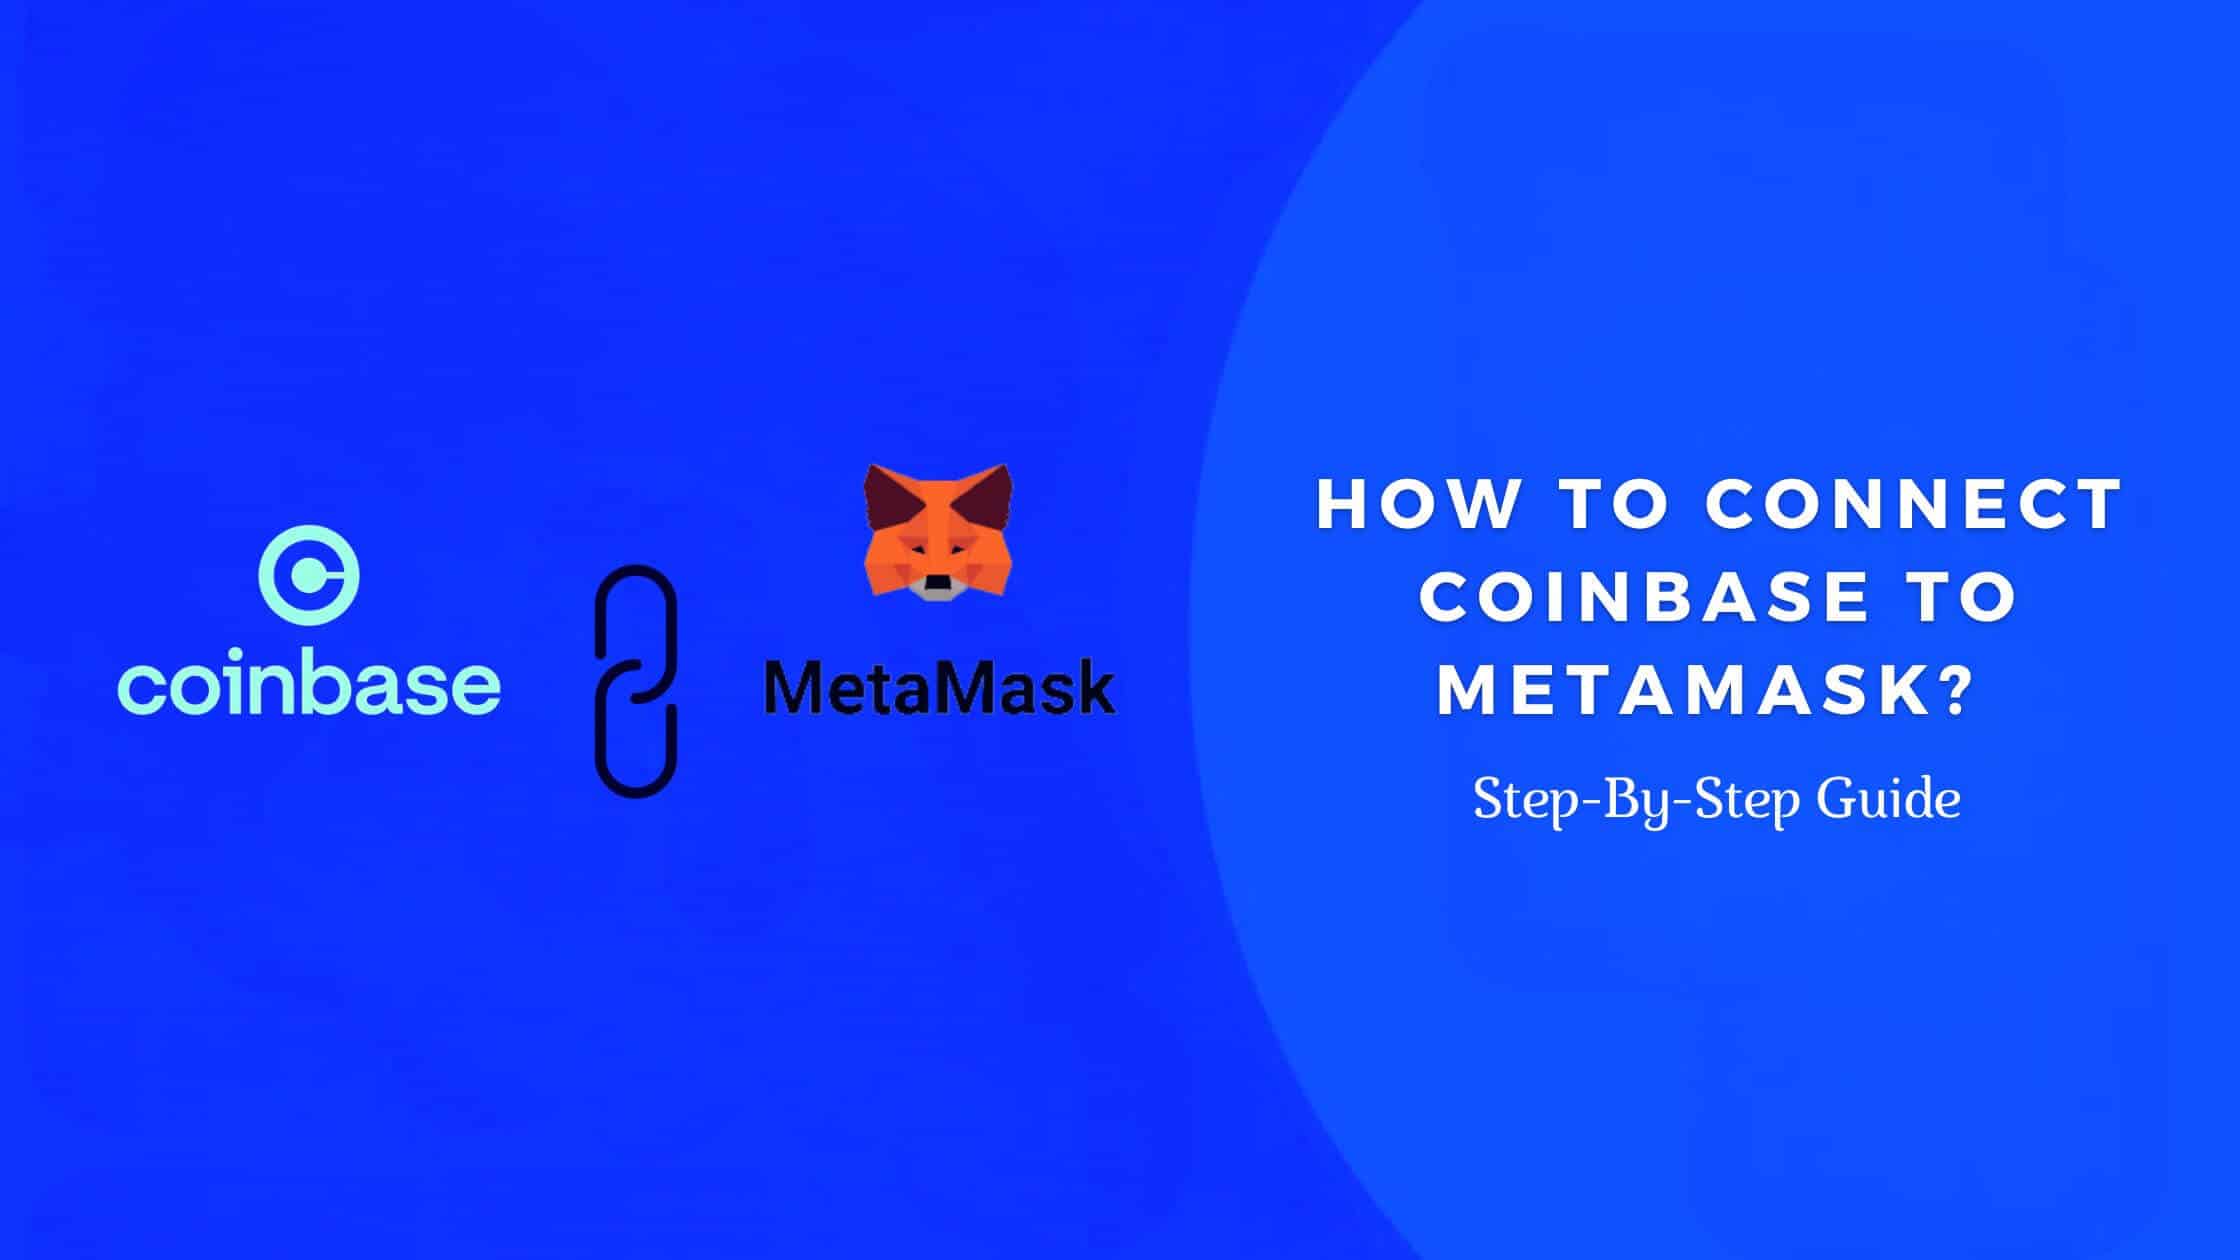 How To Connect Coinbase To Metamask Step-By-Step Guide